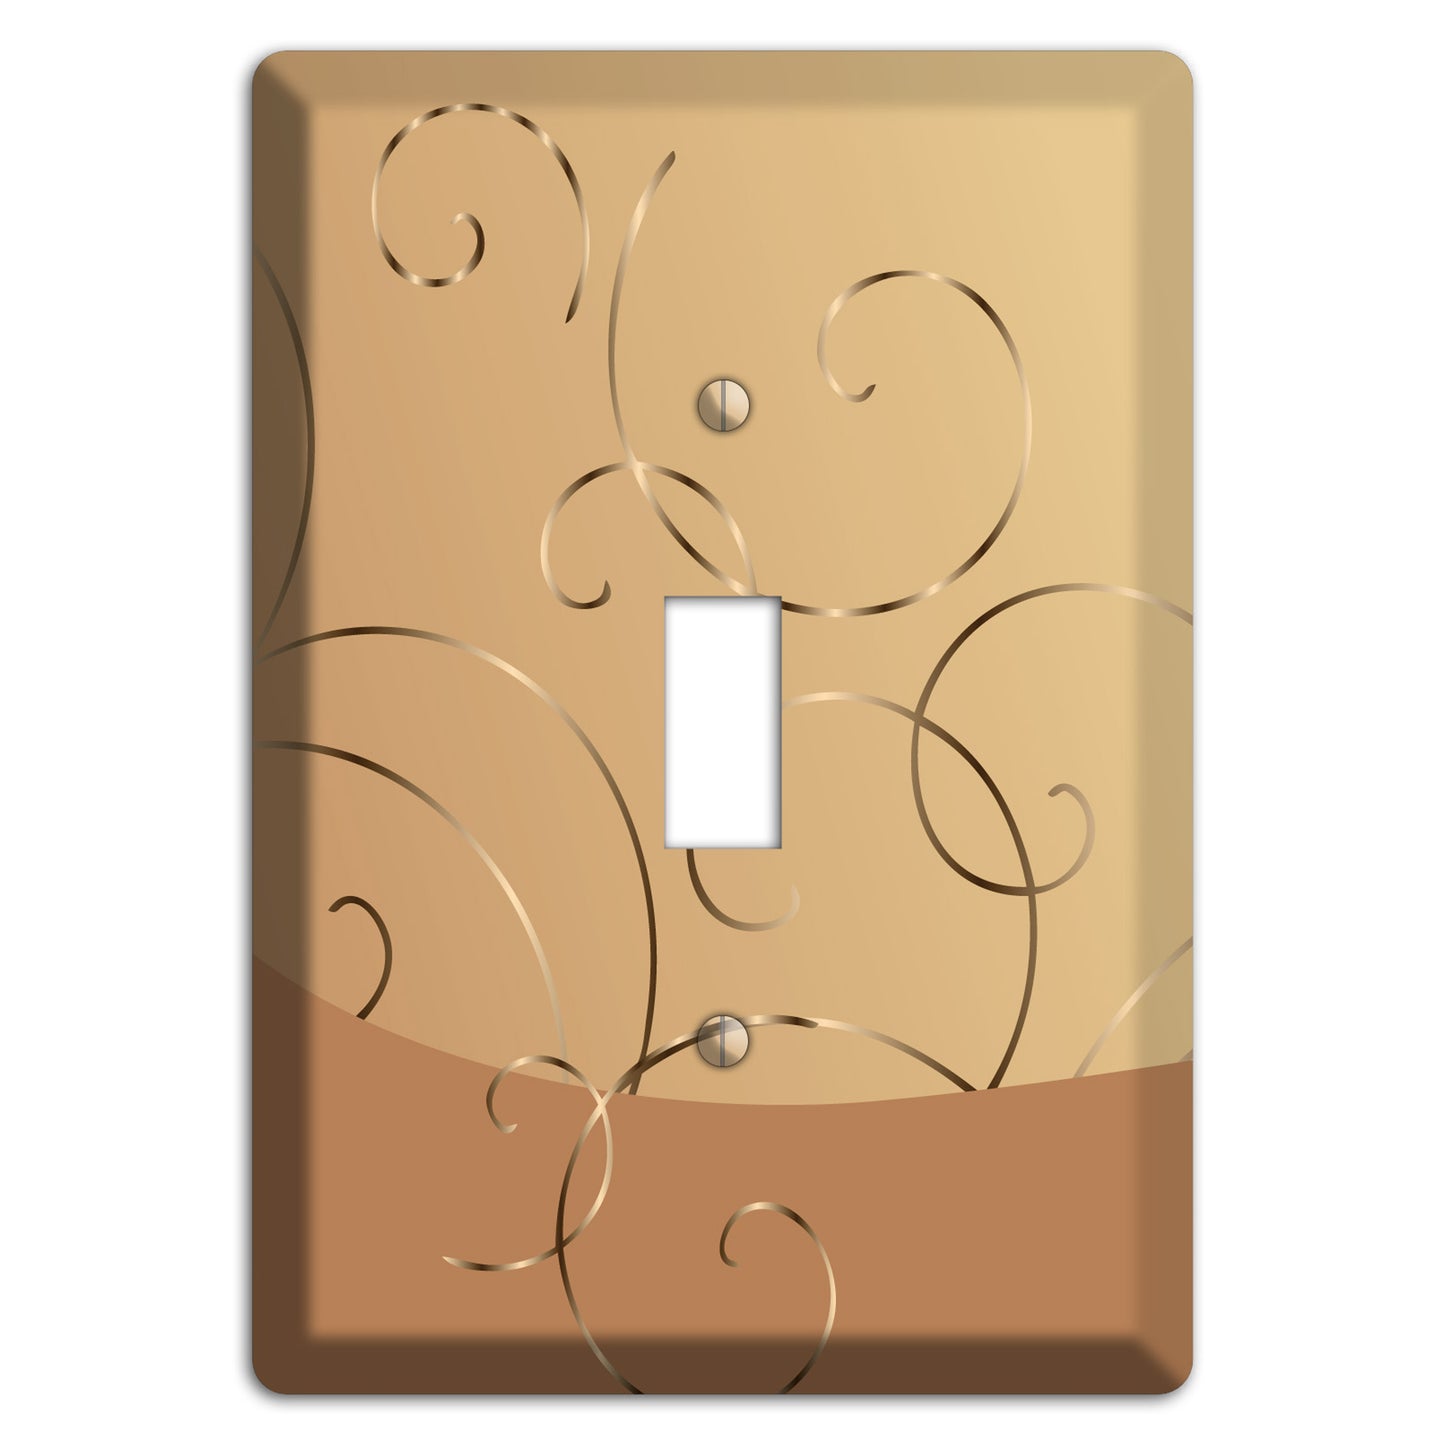 Light Brown and Beige Swirl Cover Plates